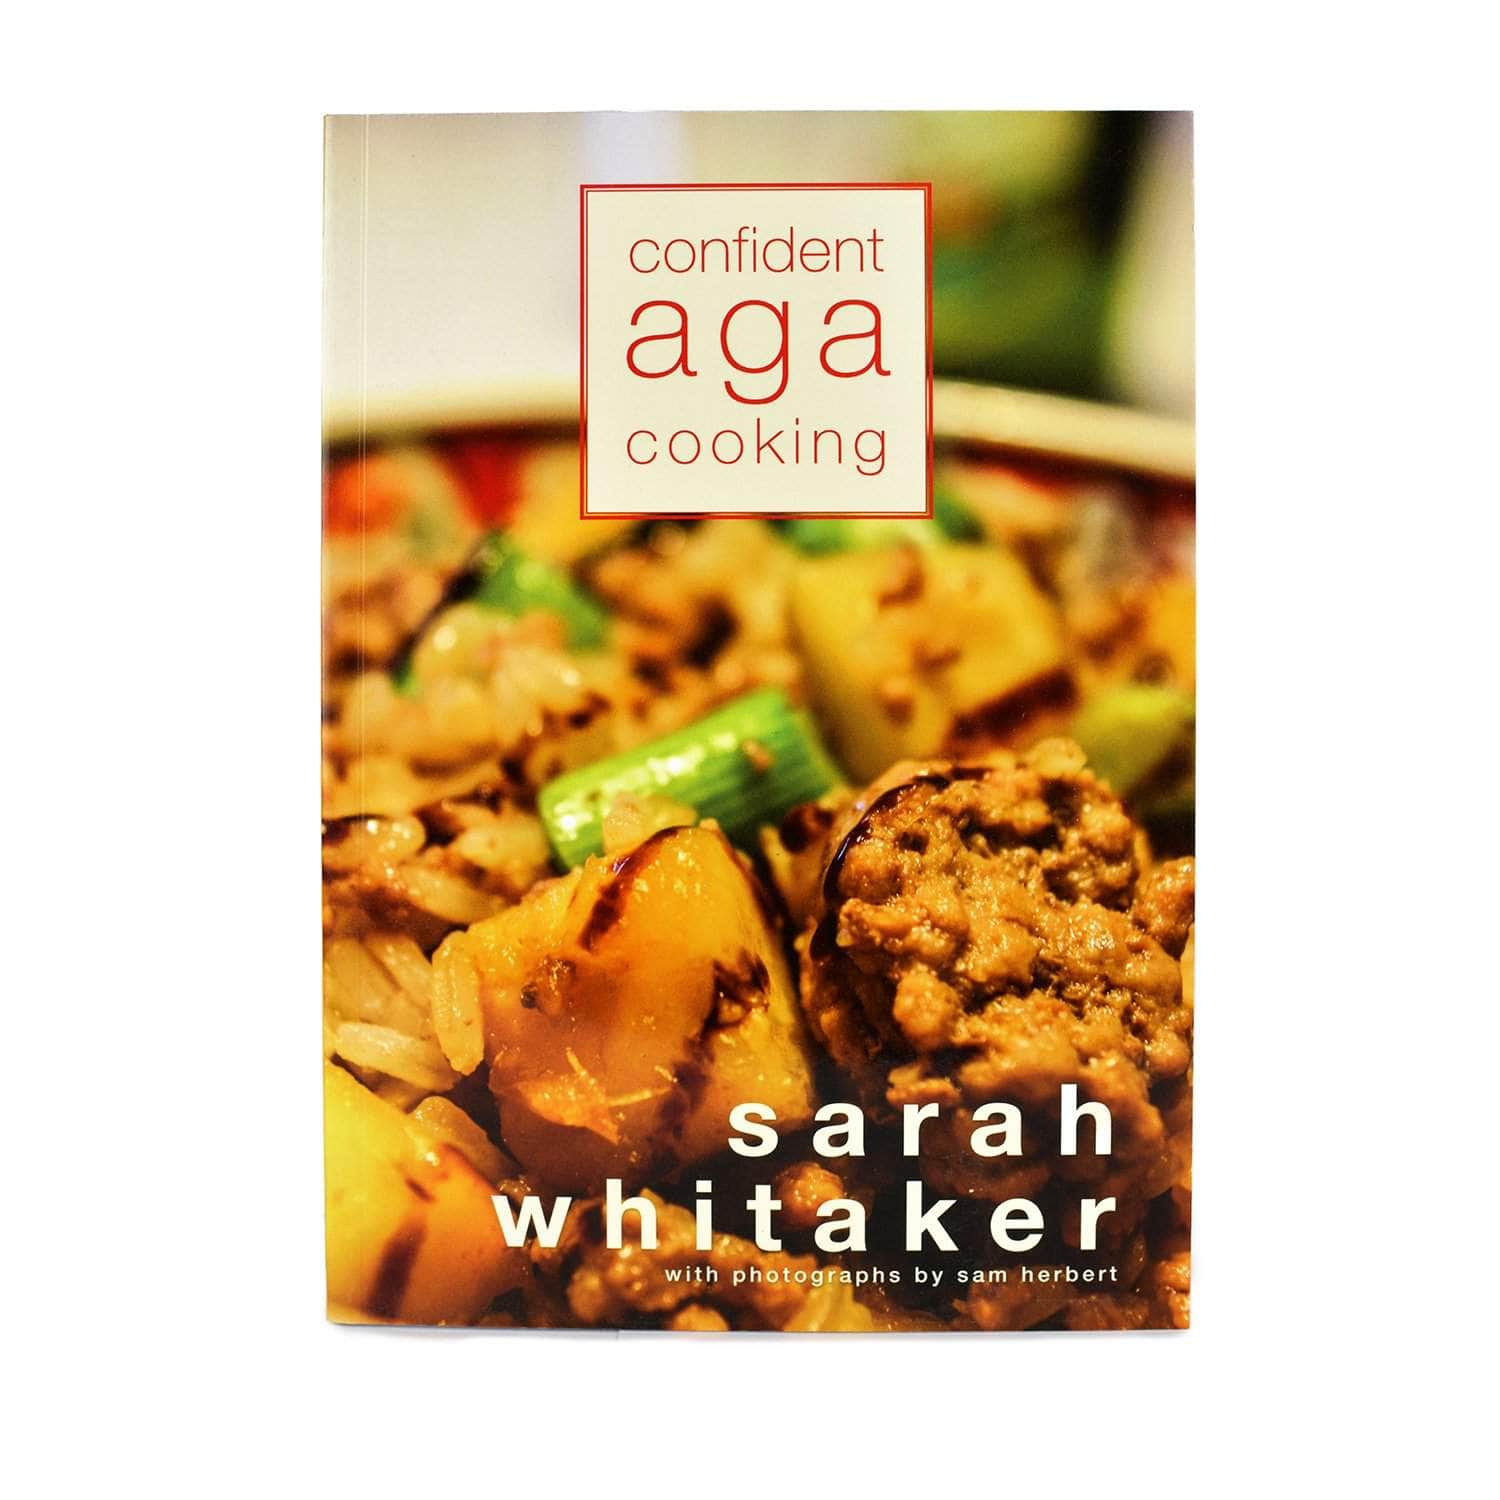 'Confident Aga cooking' - cookbook by Sarah Whitaker